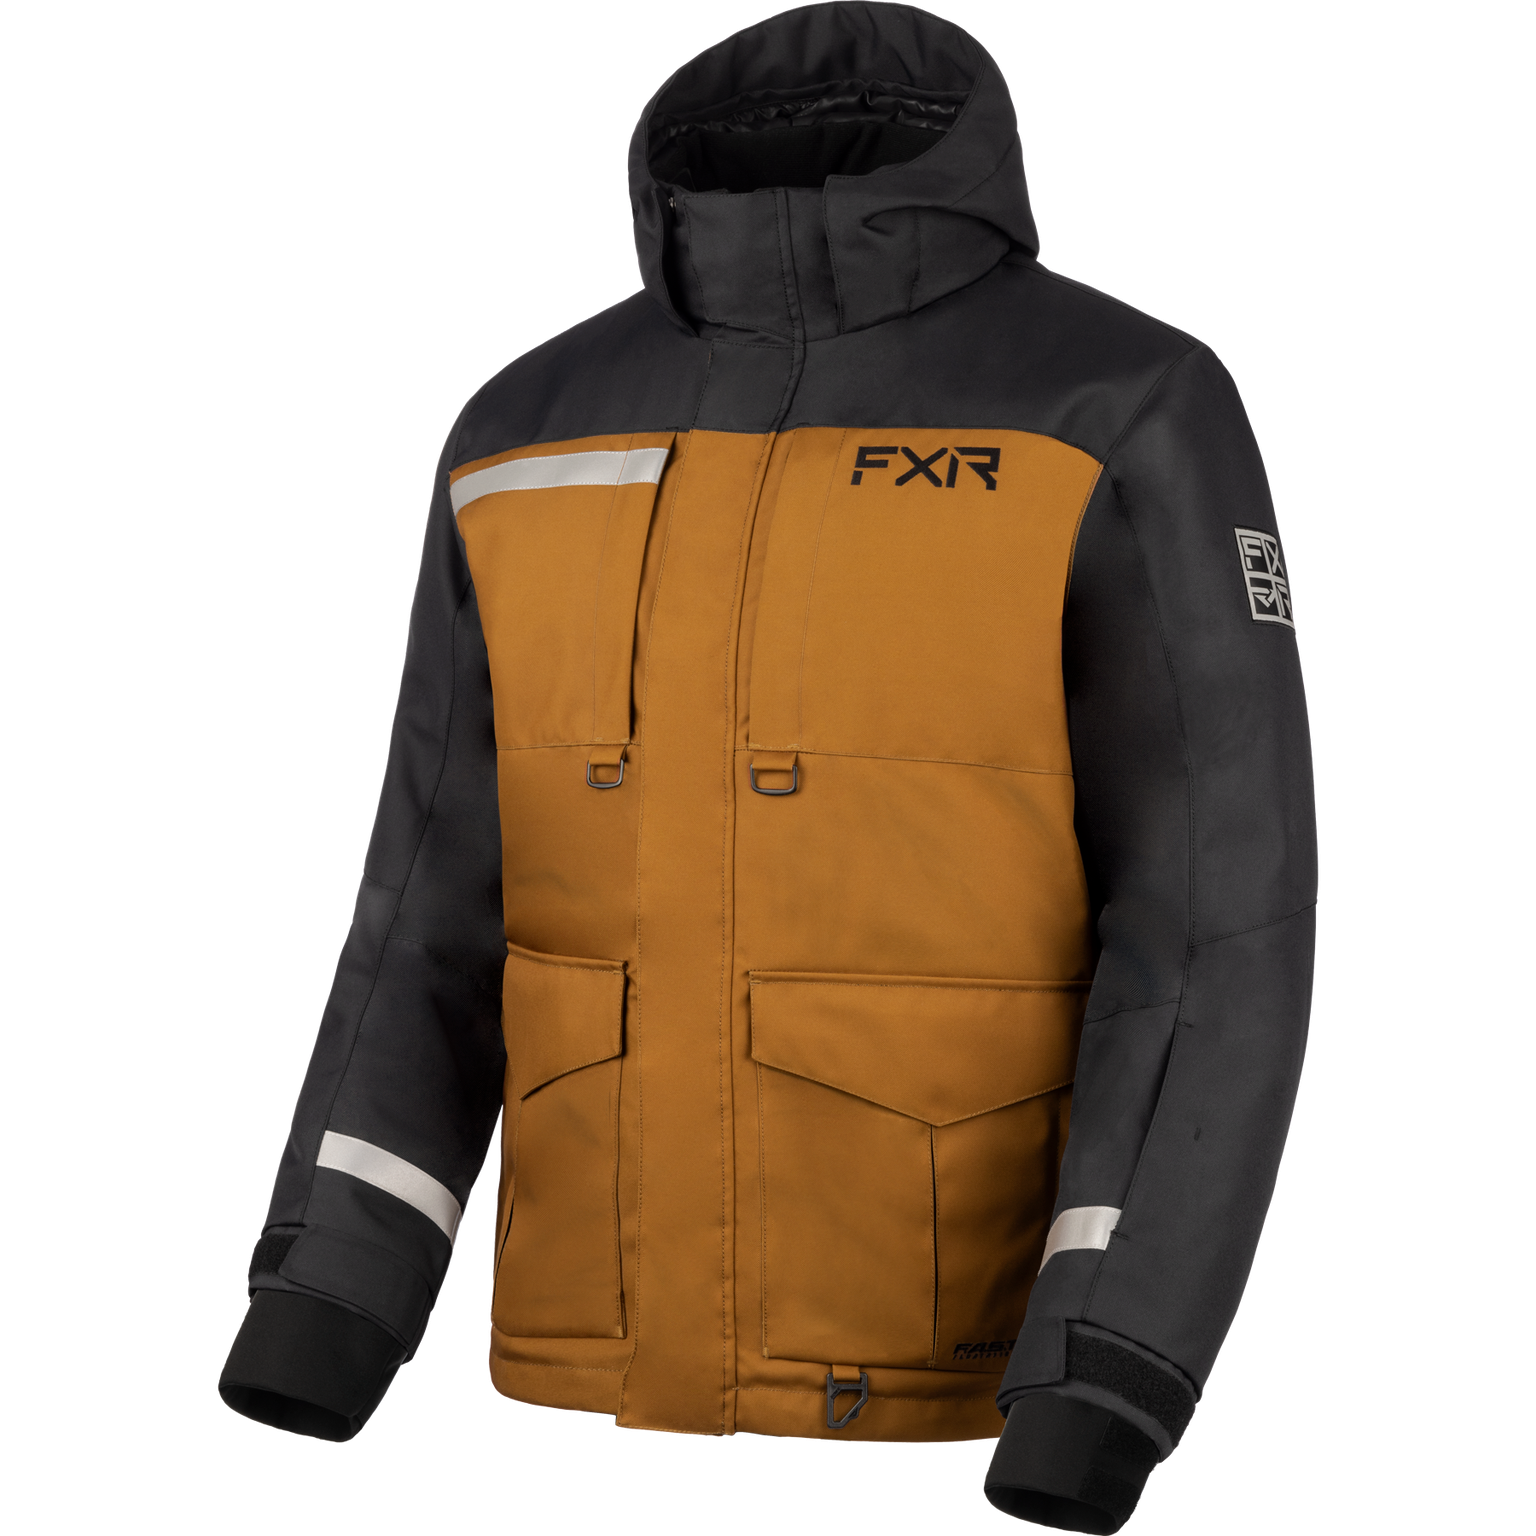 fxr racing insulated jackets for men excursion ice pro fast